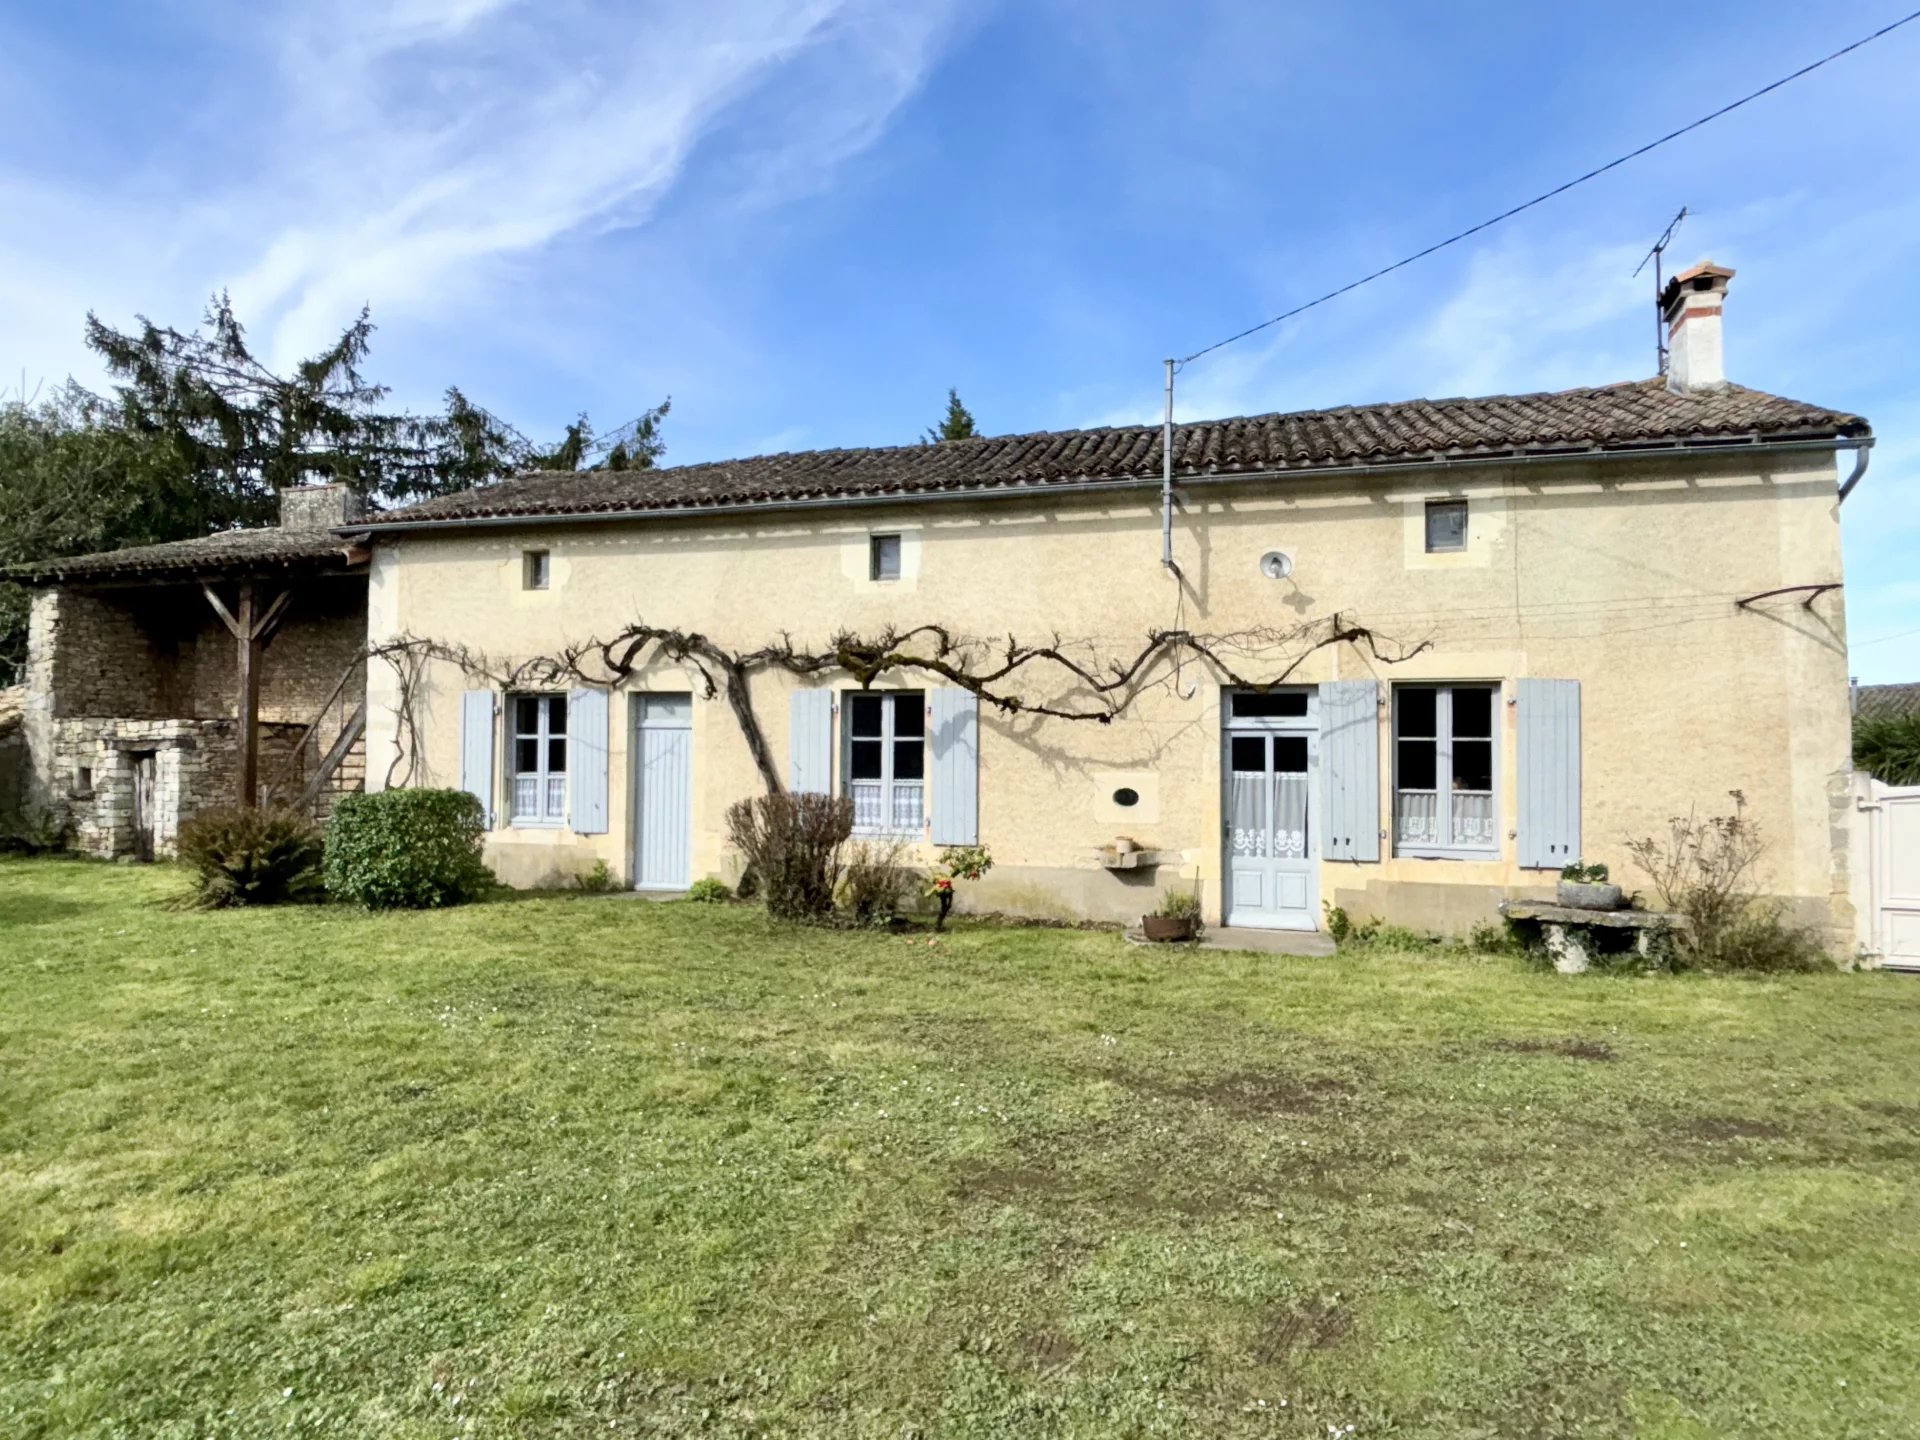 Three character Houses, two barns and over 4000m2 of attached land